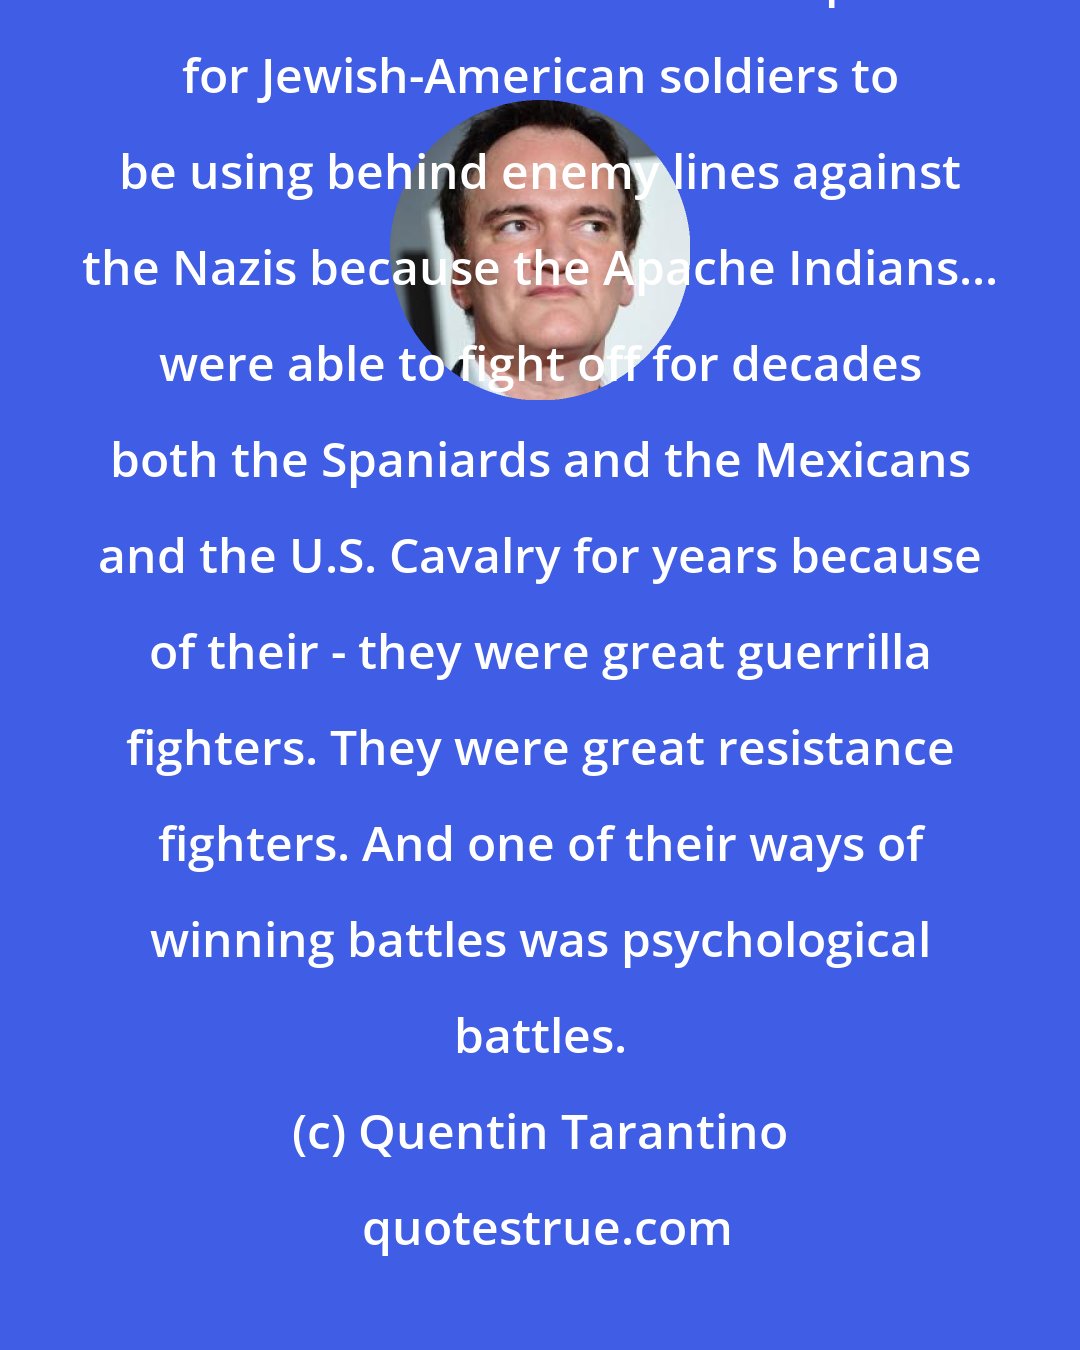 Quentin Tarantino: It hit me that an Apache resistance would be a wonderful, you know, it would be a wonderful metaphor for Jewish-American soldiers to be using behind enemy lines against the Nazis because the Apache Indians... were able to fight off for decades both the Spaniards and the Mexicans and the U.S. Cavalry for years because of their - they were great guerrilla fighters. They were great resistance fighters. And one of their ways of winning battles was psychological battles.